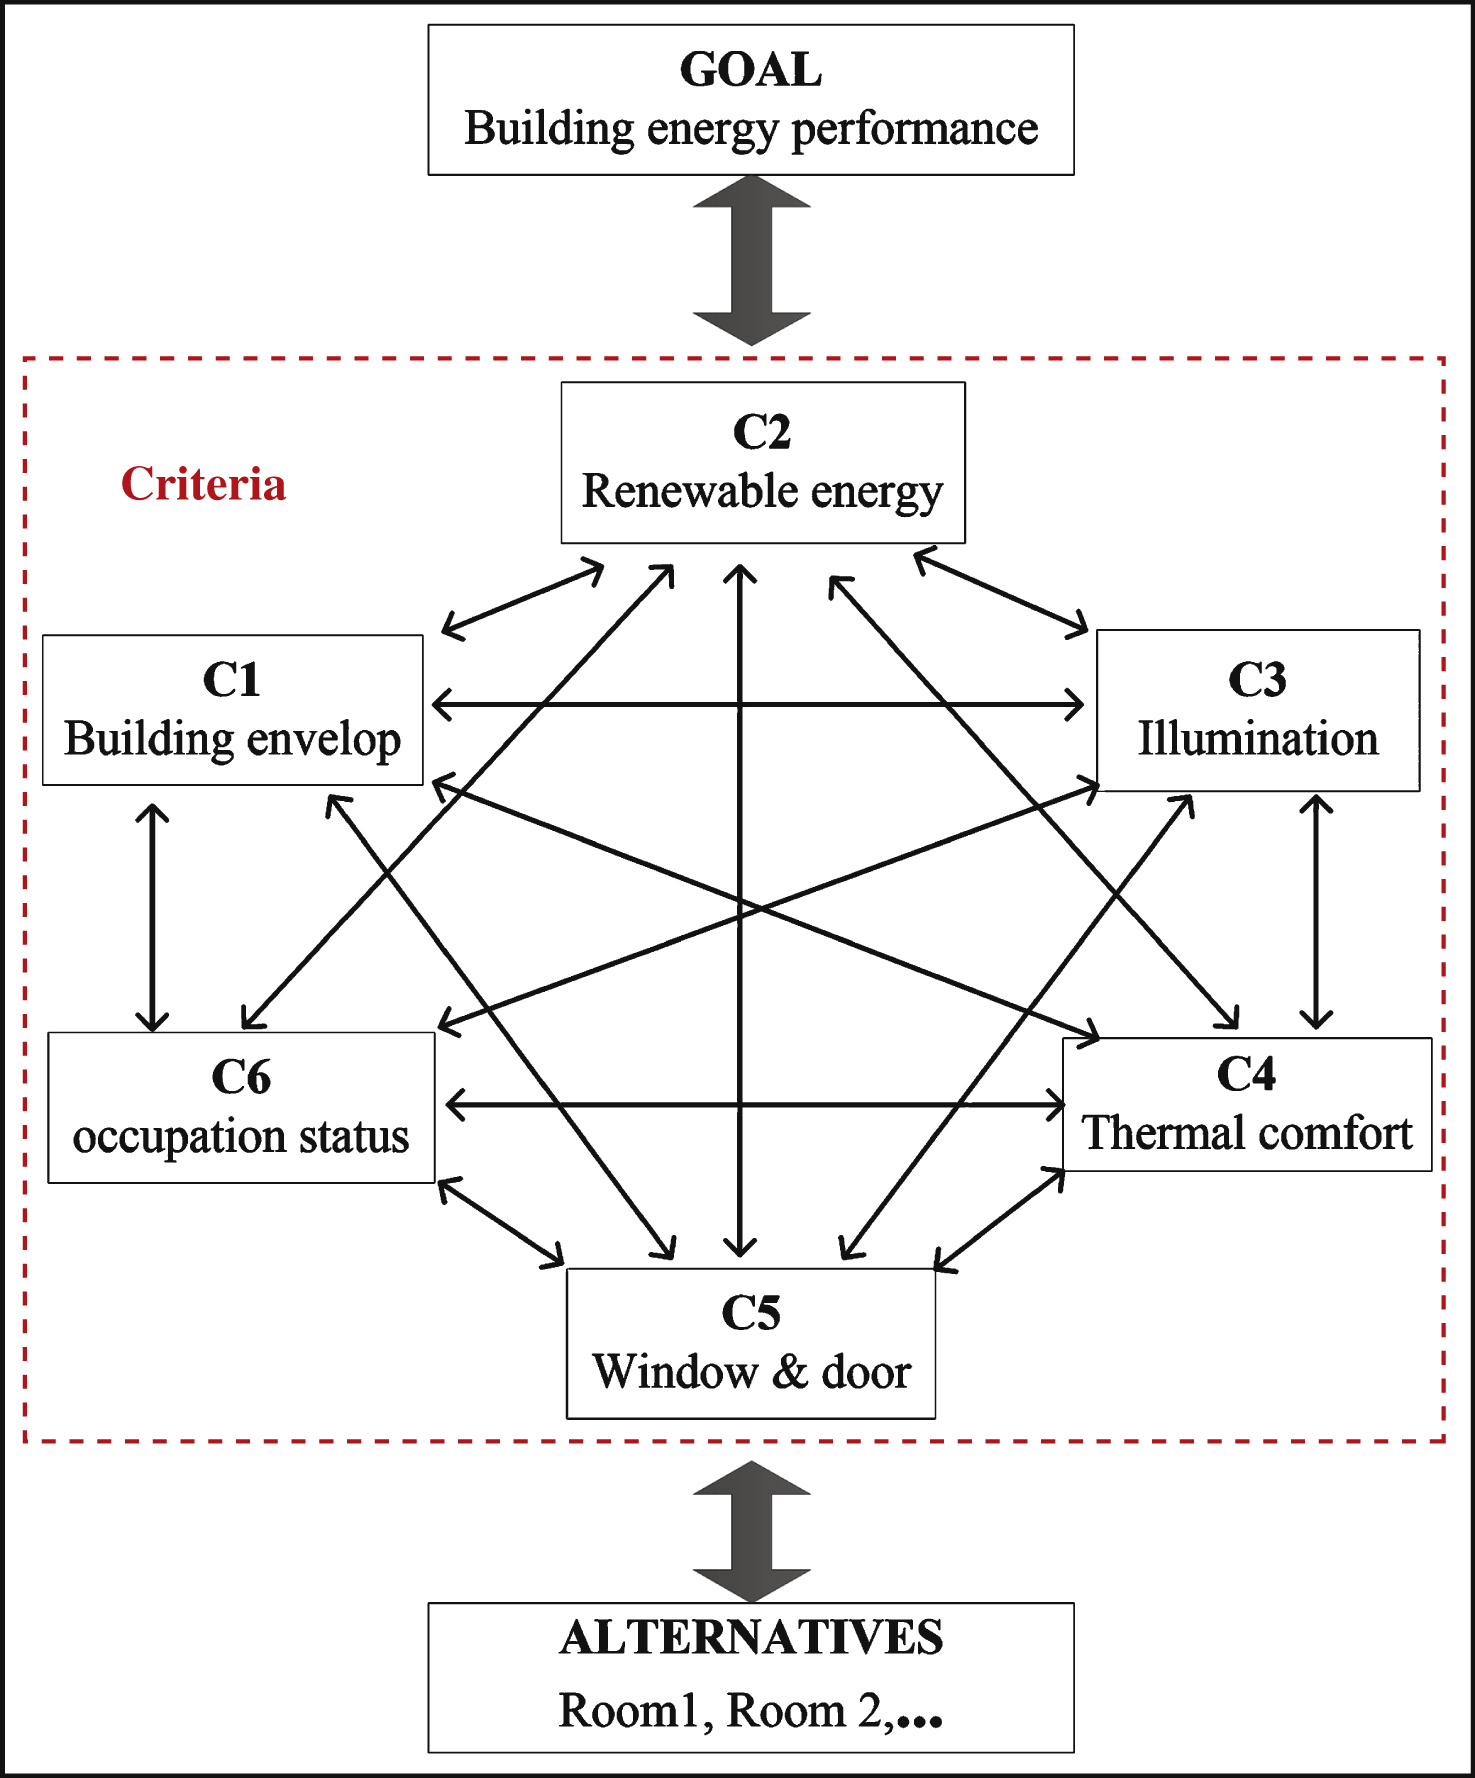 Network structure of the proposed approach to assess building performance.